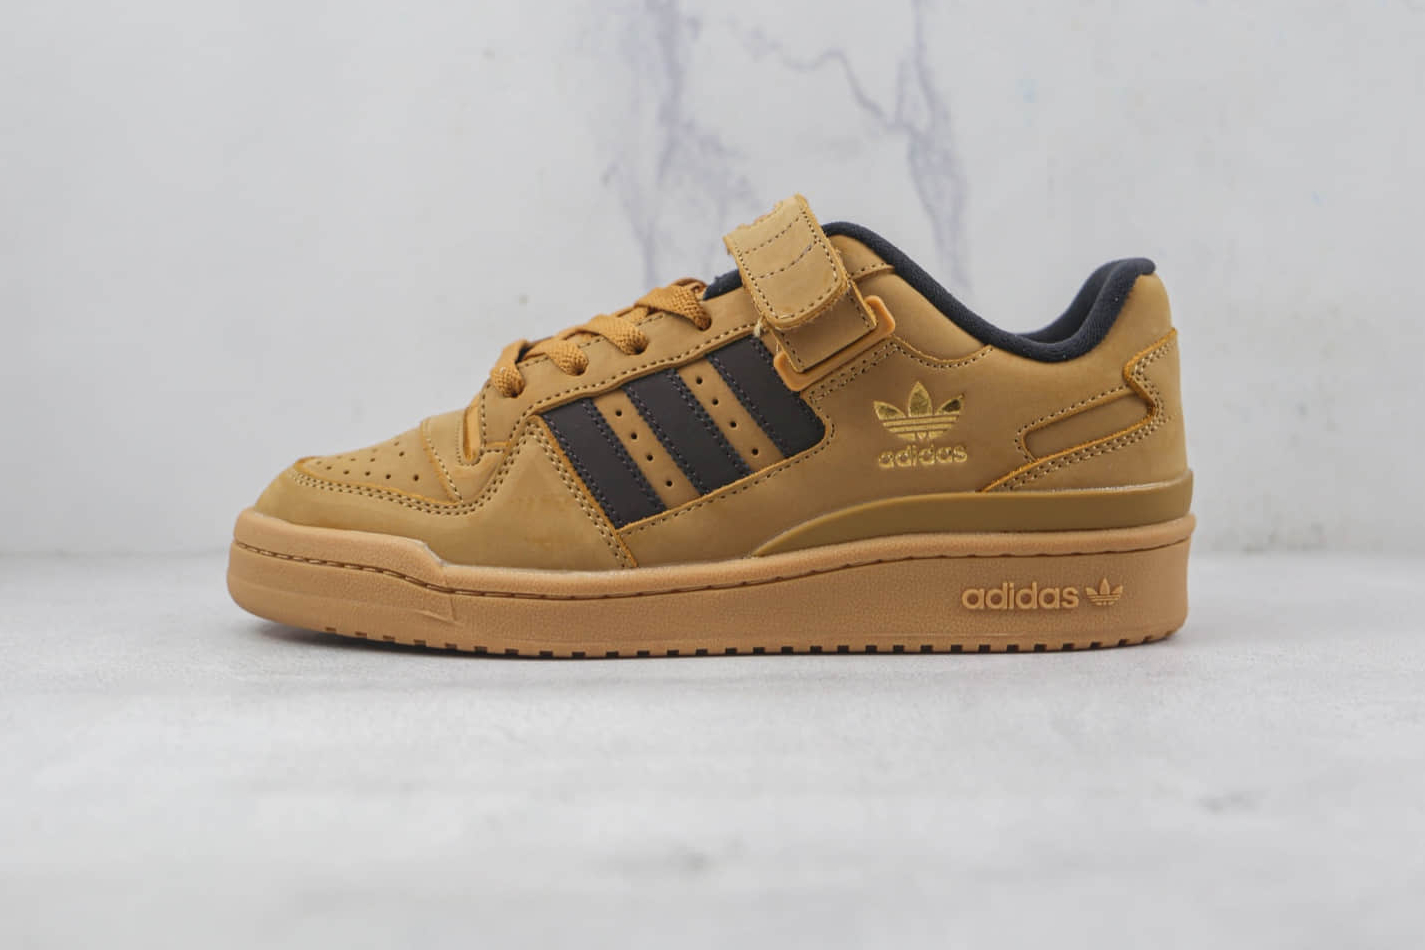 Adidas Originals Forum Low GW6230 - Classic Style with Modern Vibes